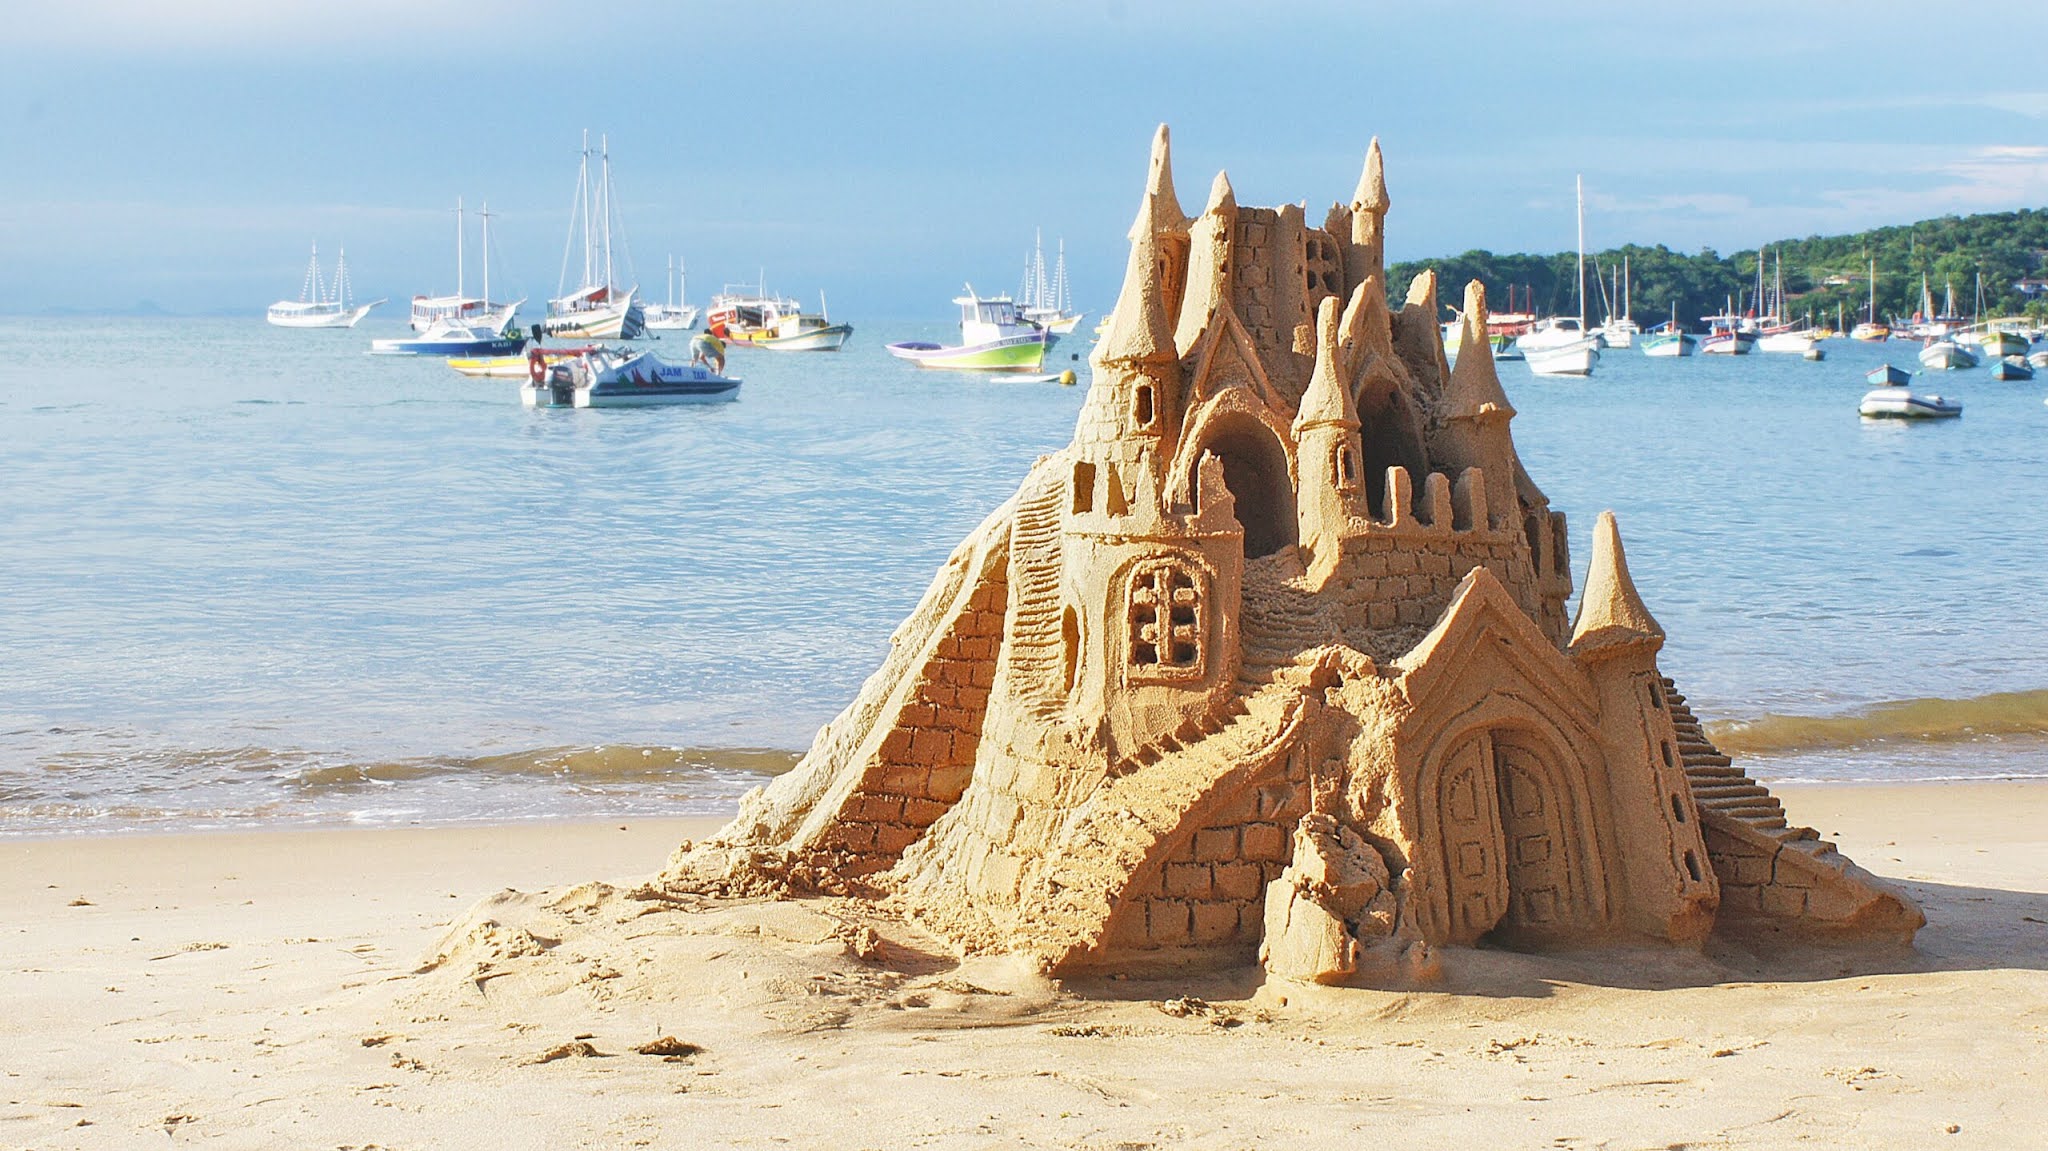 Sand Castle Competitions